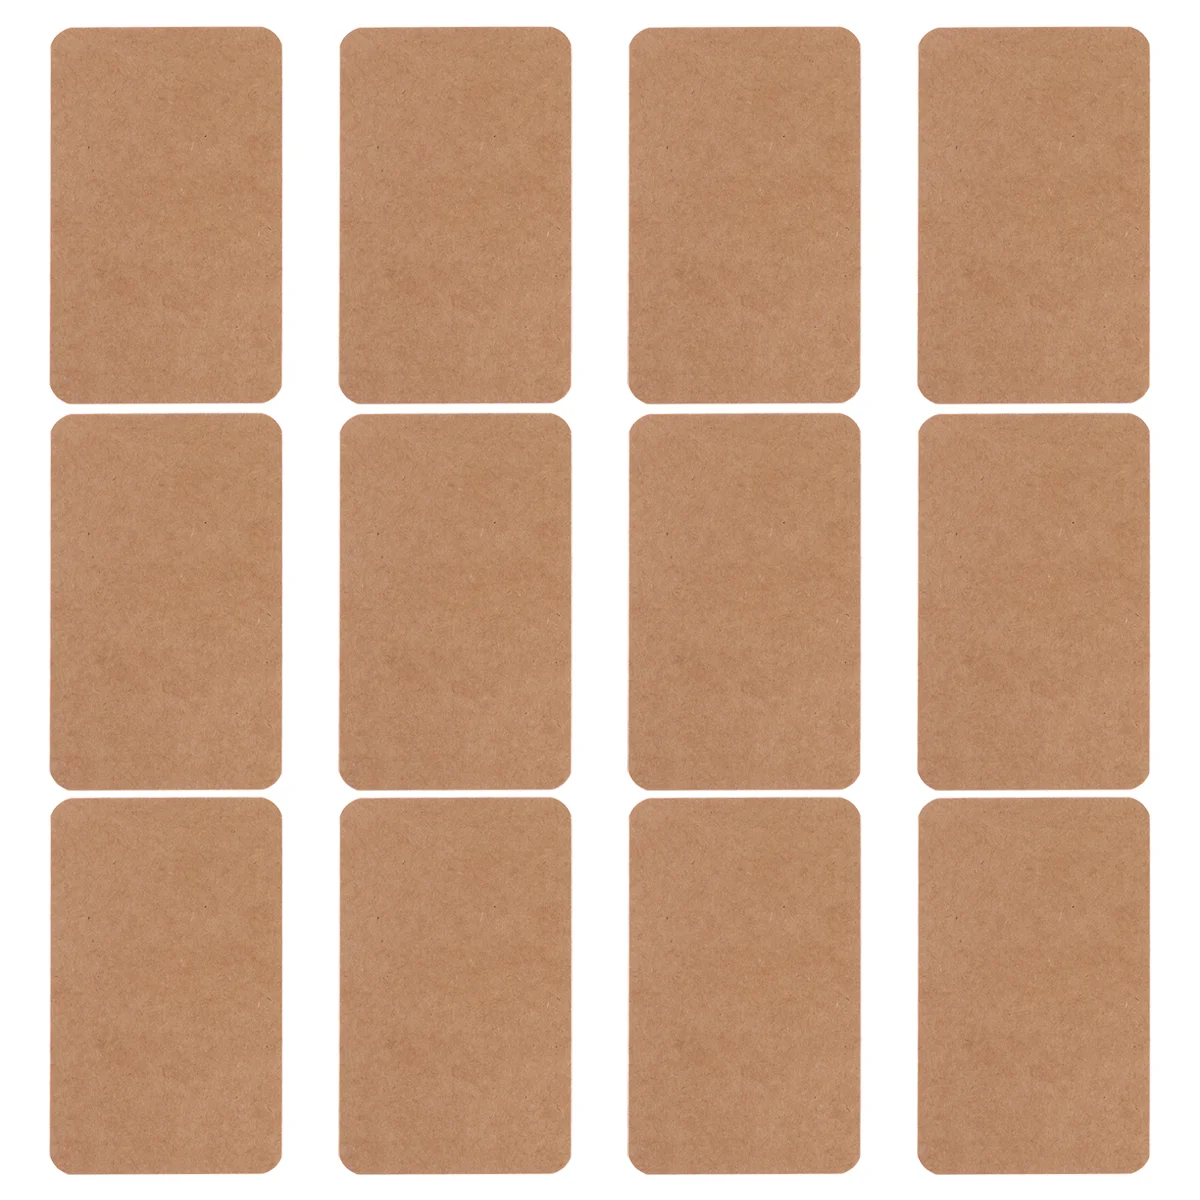 

100pcs Blank Kraft Paper Cards Study Notes Printable Labels Vocabulary Word DIY Craft Writing Greeting Postcard for